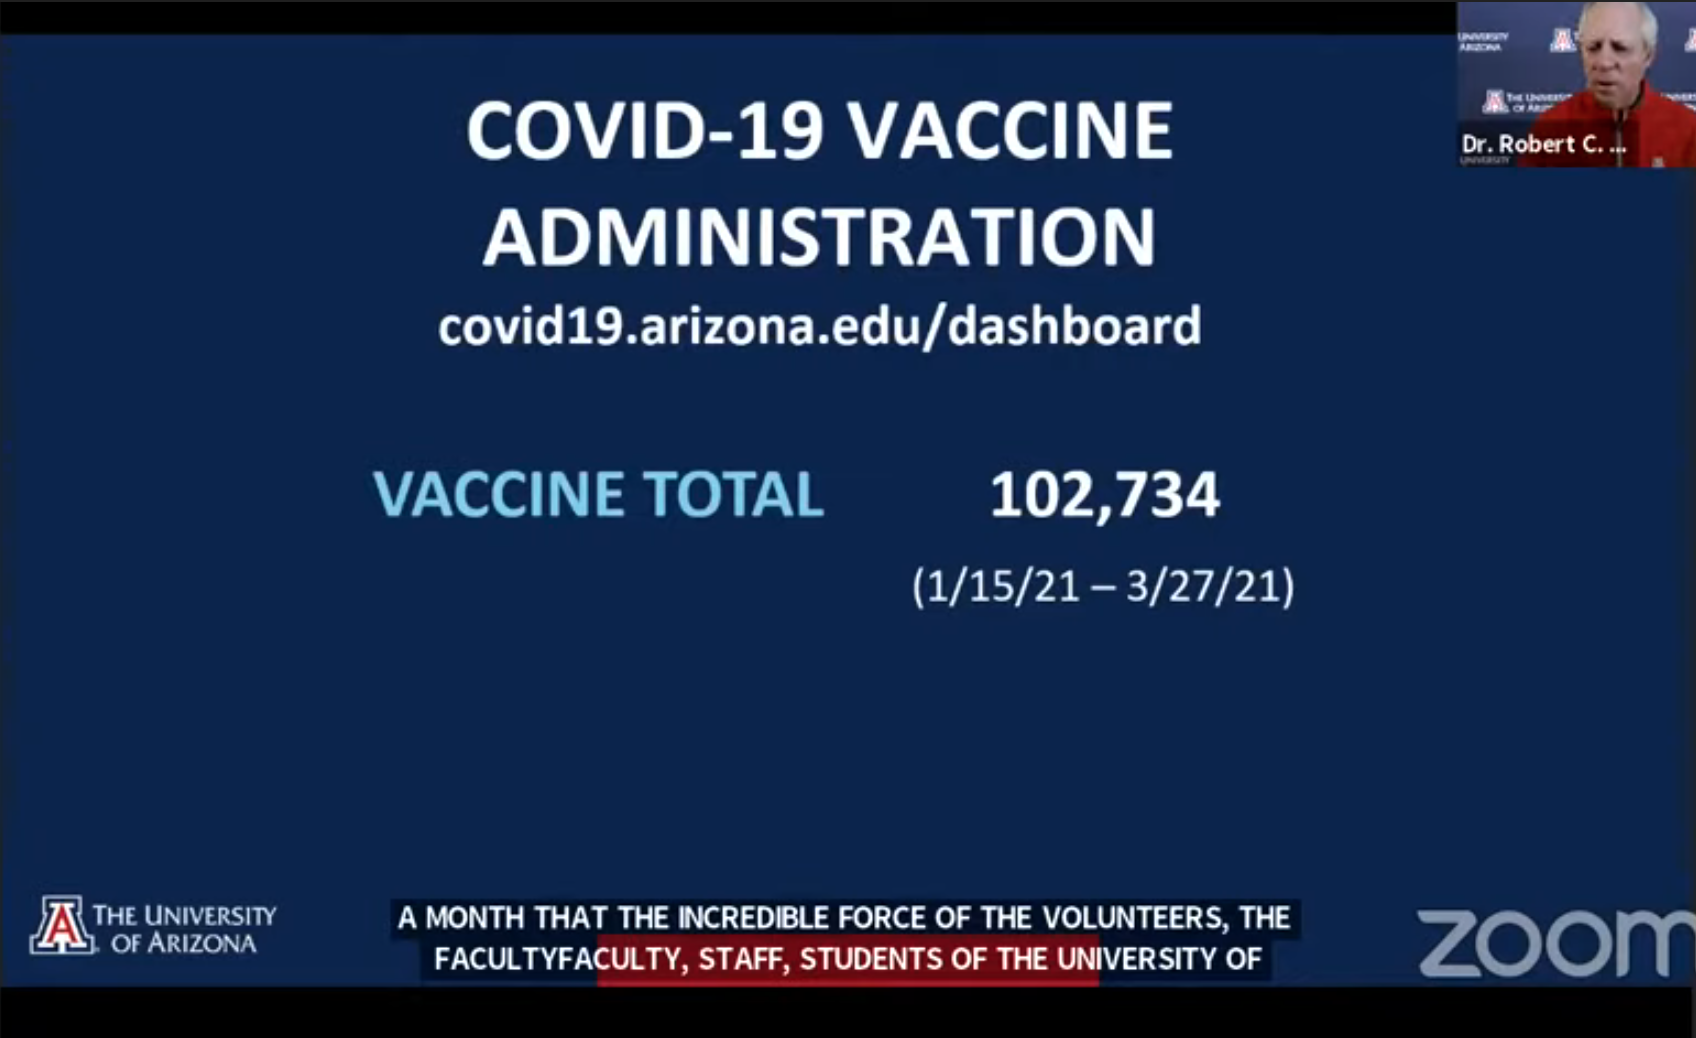 Screenshot of recent COVID-19 vaccine administration data, reflecting the UA Point of Distribution has given out over 102,000 vaccine doses since Jan. 15, 2021.